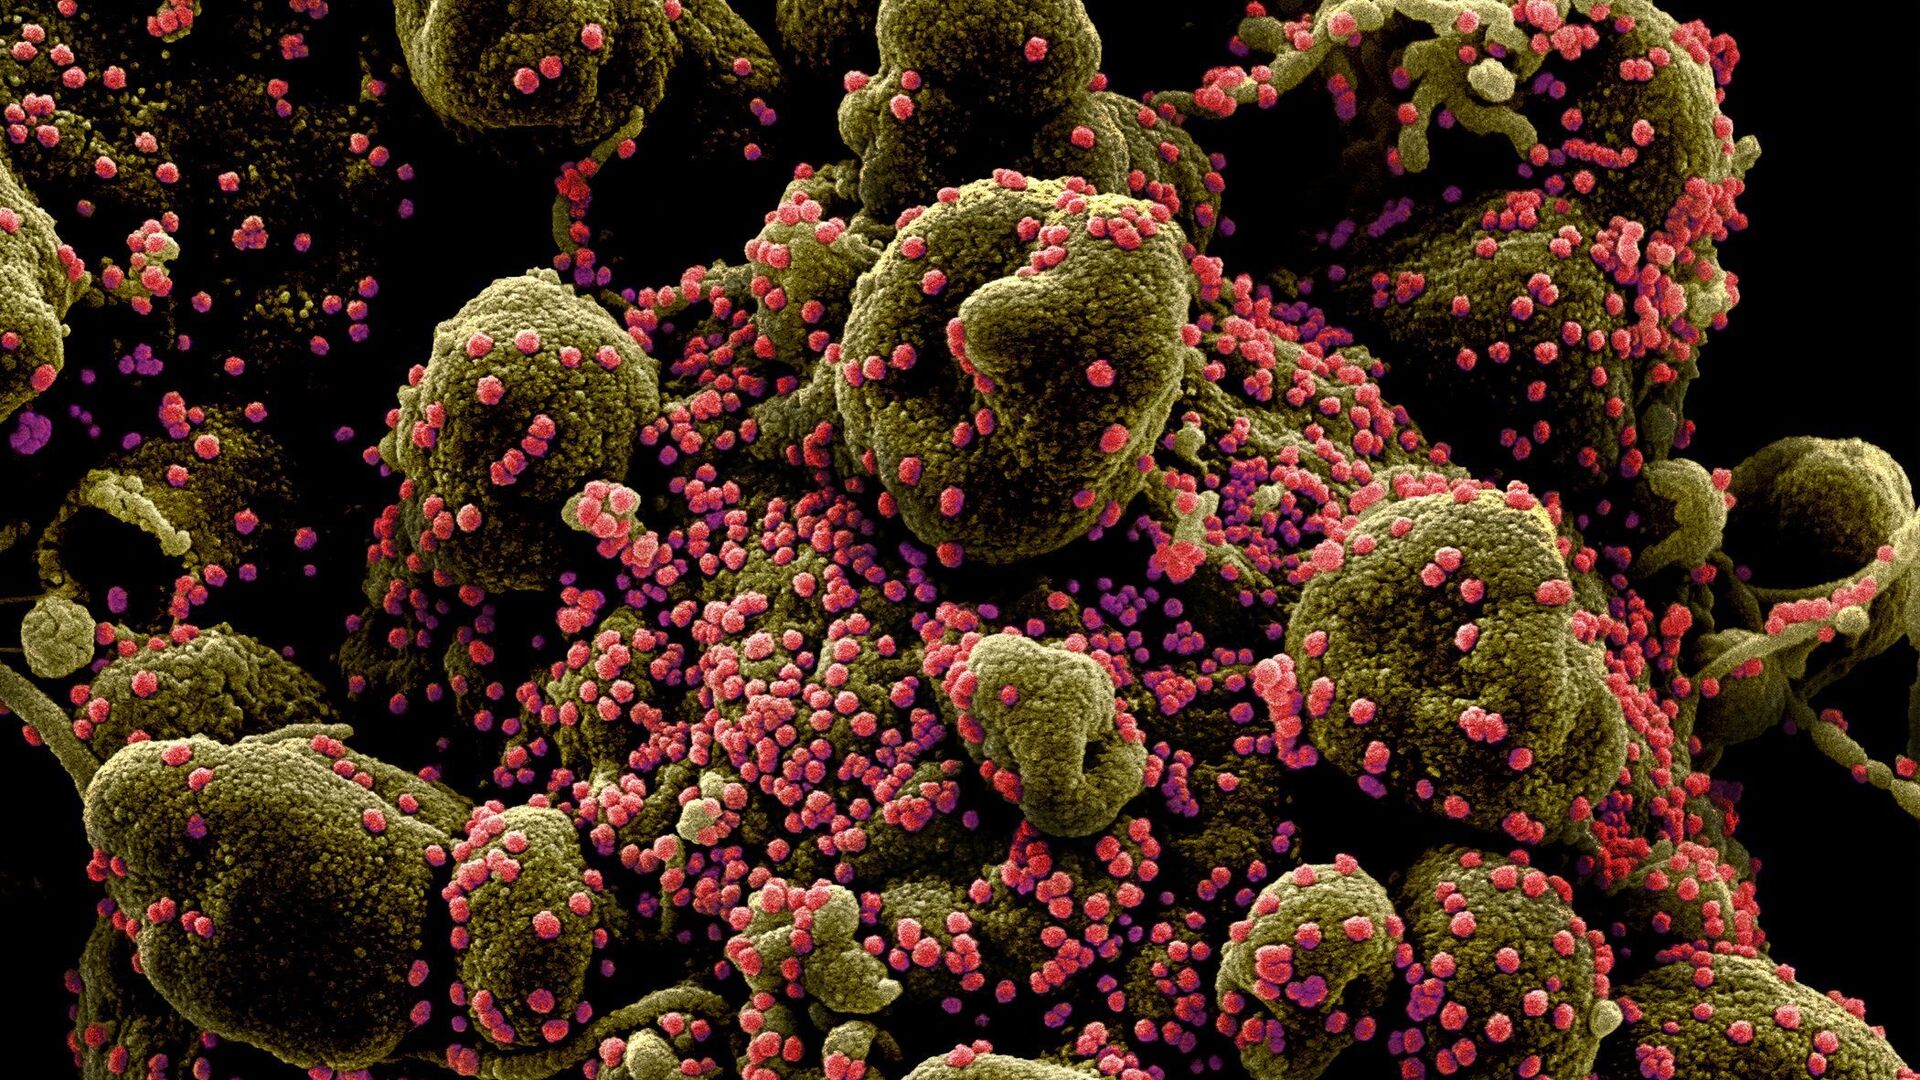 Colourized scanning electron micrograph of an apoptotic cell (greenish-brown) heavily infected with SARS-COV-2 virus particles (pink), also known as novel coronavirus, isolated from a patient sample. Image captured and colour-enhanced at the NIAID Integrated Research Facility (IRF) in Fort Detrick, Maryland. - Sputnik International, 1920, 22.07.2021